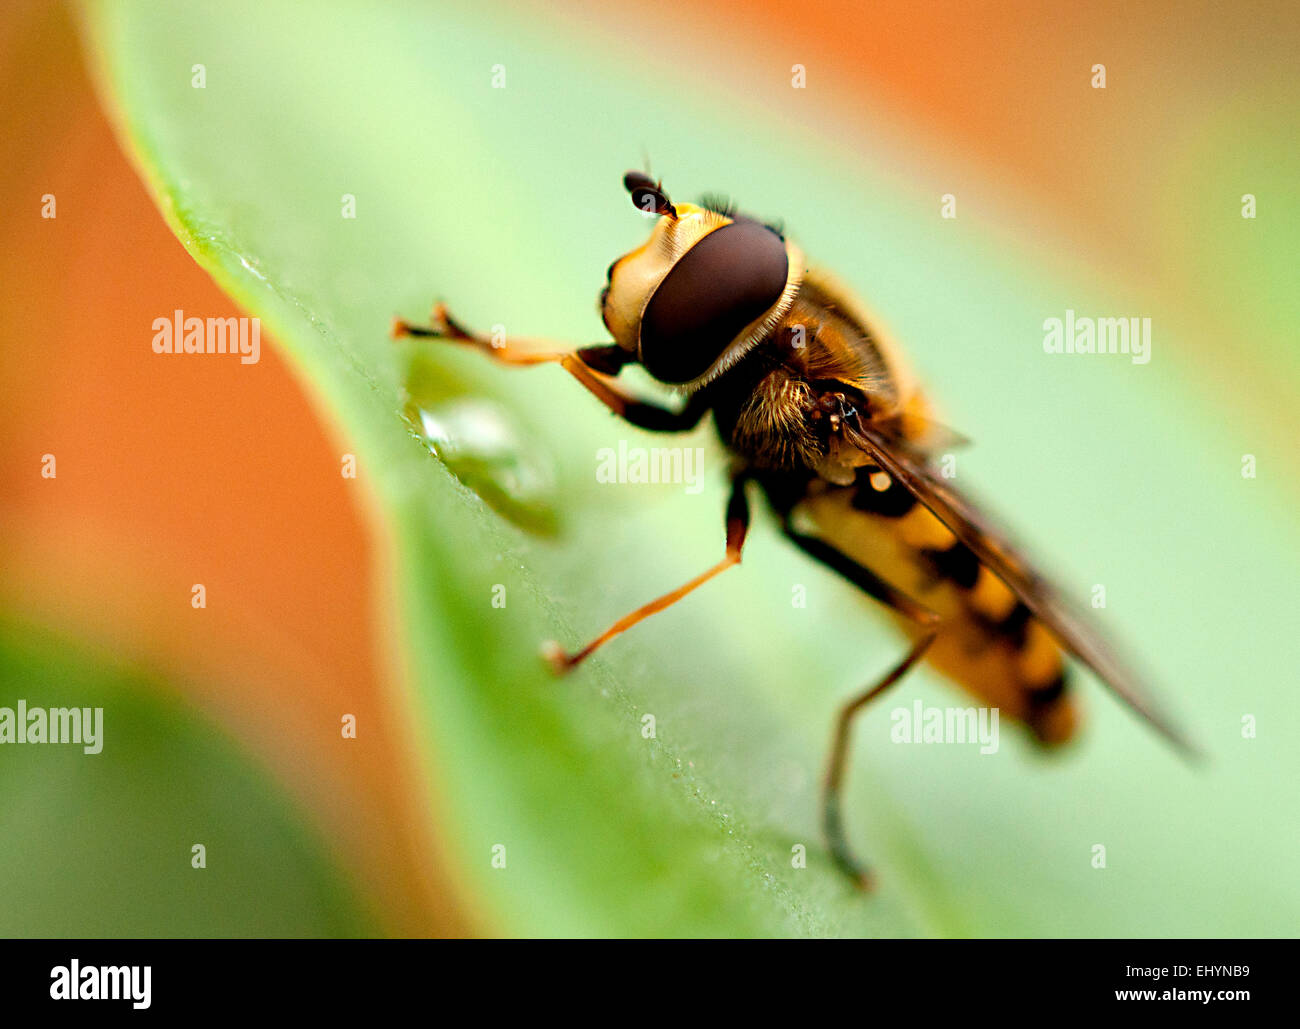 Hoverfly lunching on a leaf Stock Photo